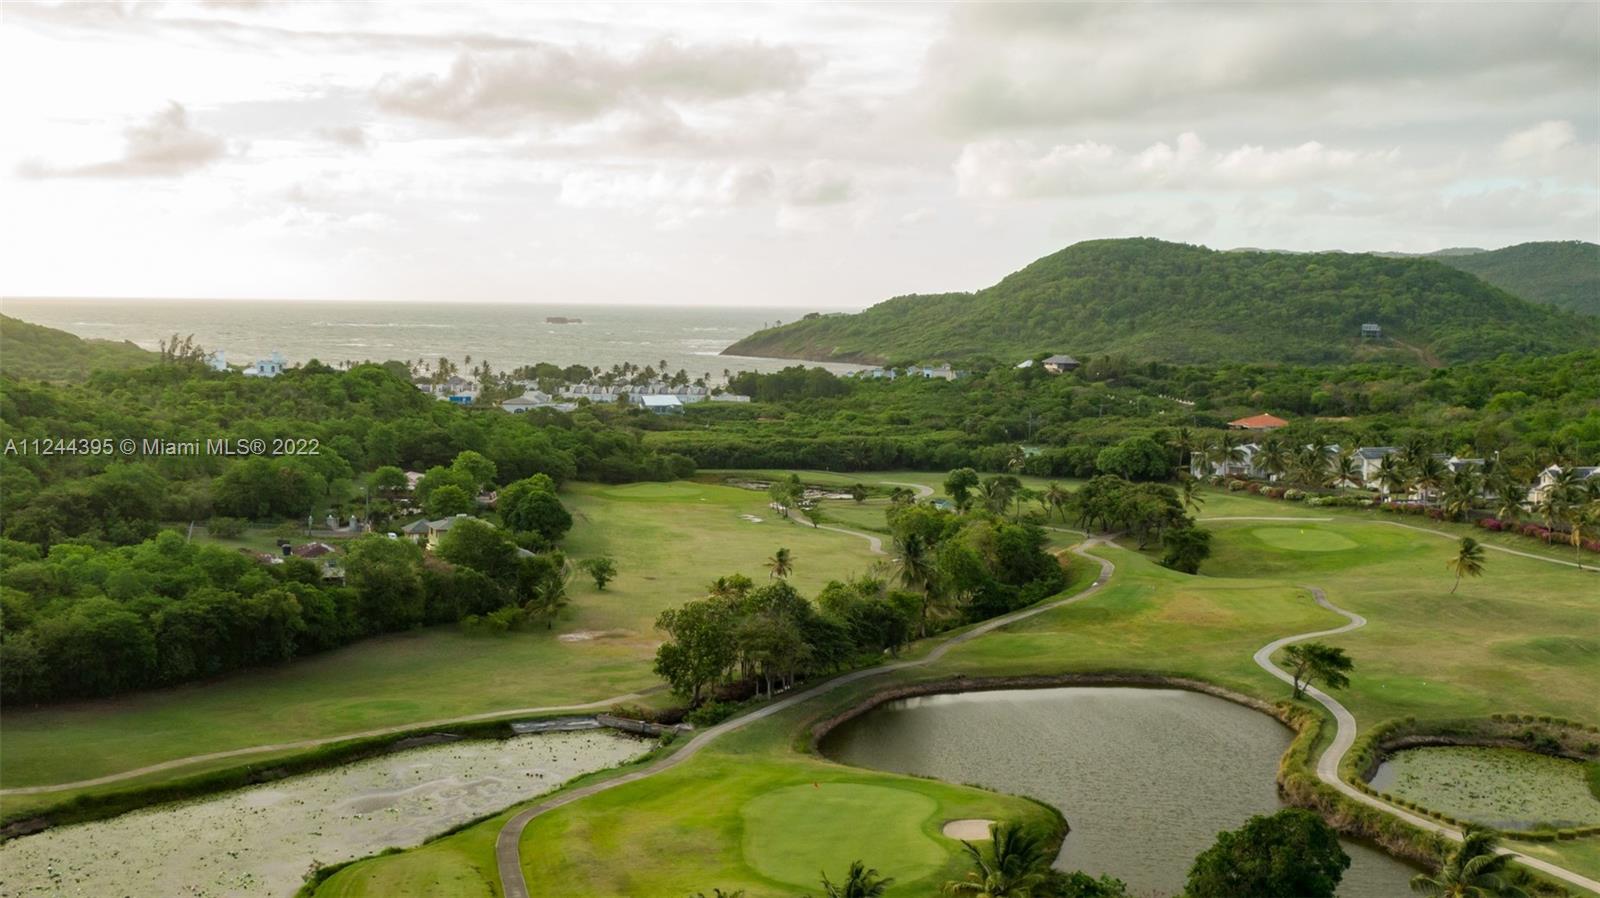 The St. Lucia Golf & Country Club - a Greg Norman-designed 18-hole course - is only minutes away.